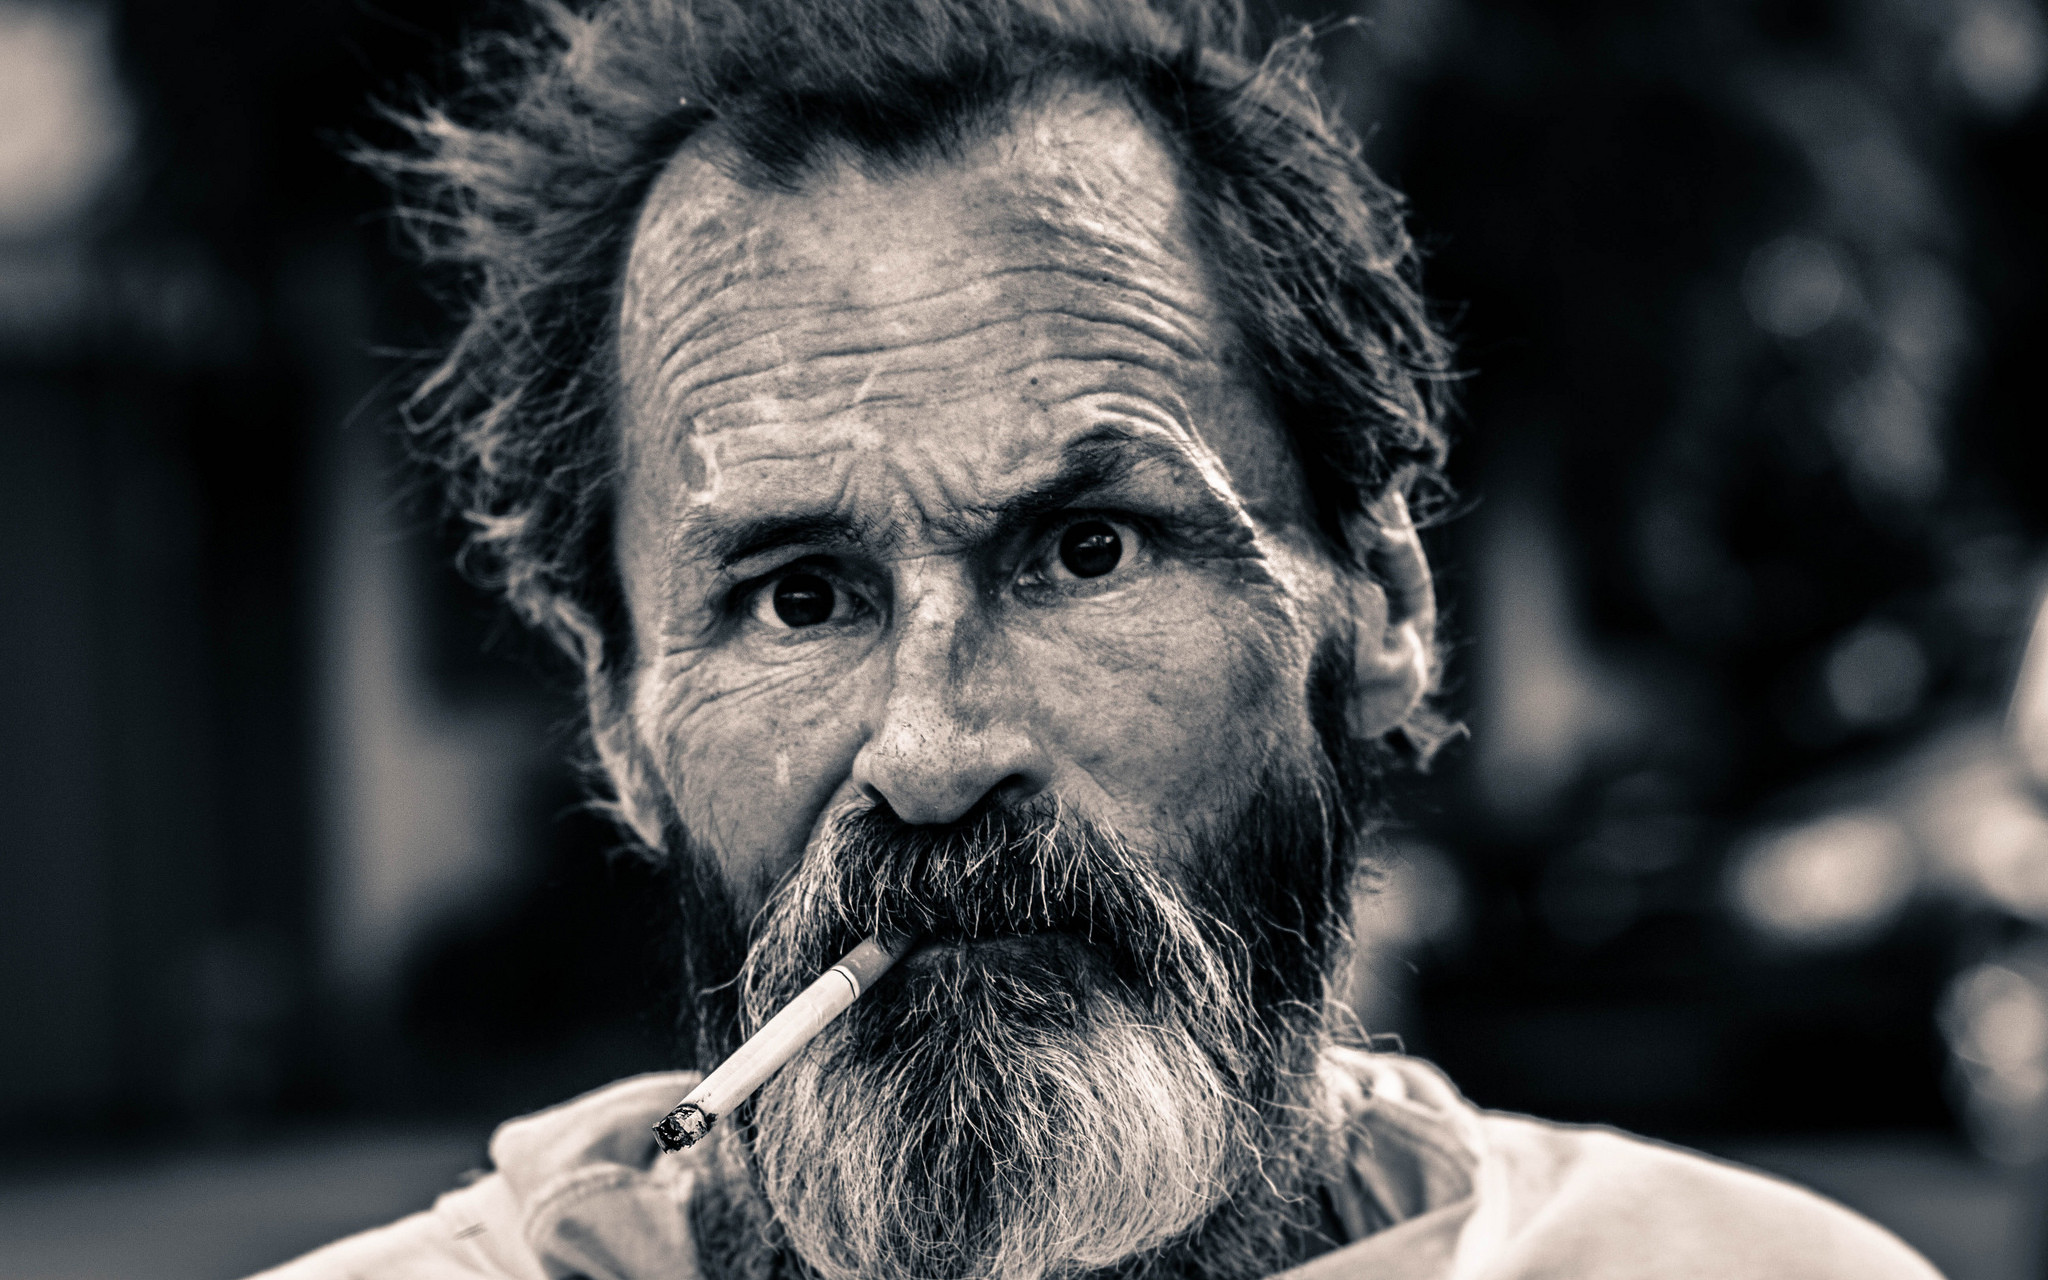 Image: Picture of a homeless man with cigarette in his mouth.